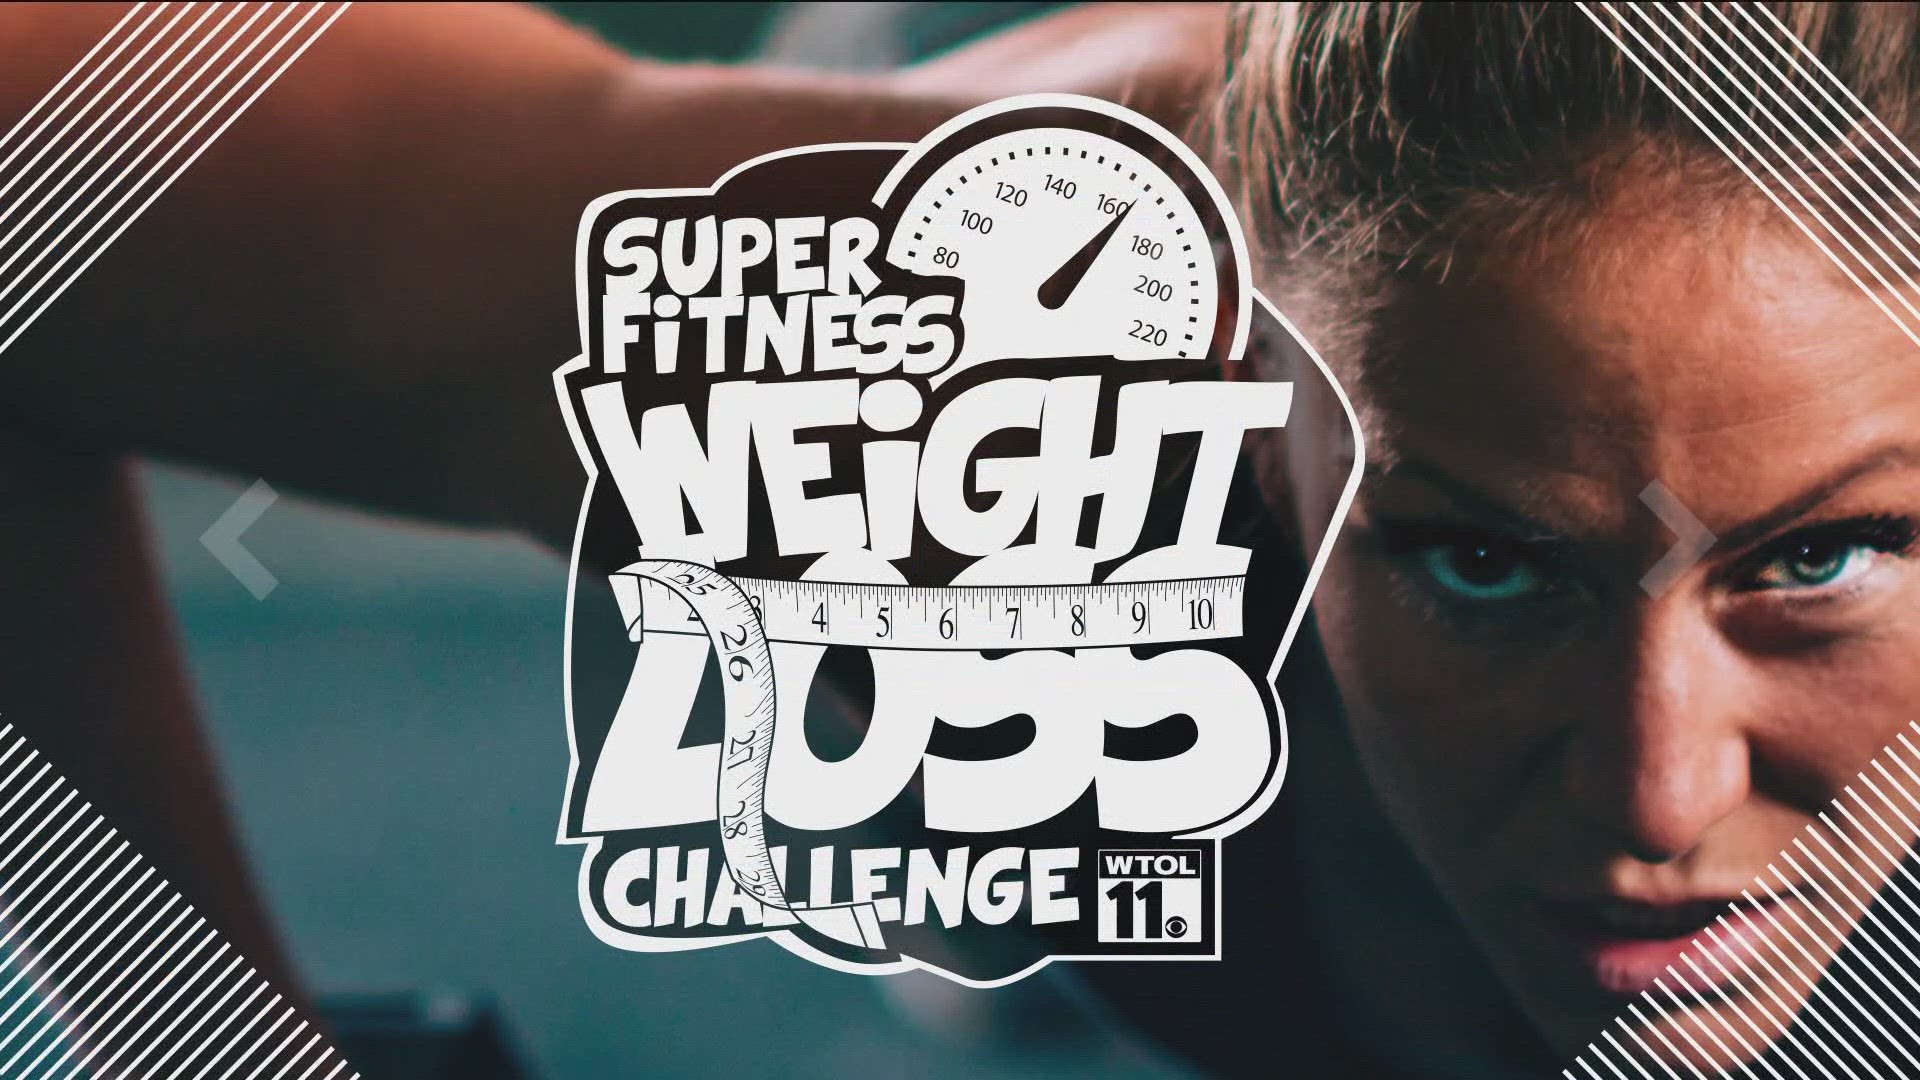 Super Fitness Weight Loss Challenge crowns a new champion for 2023!